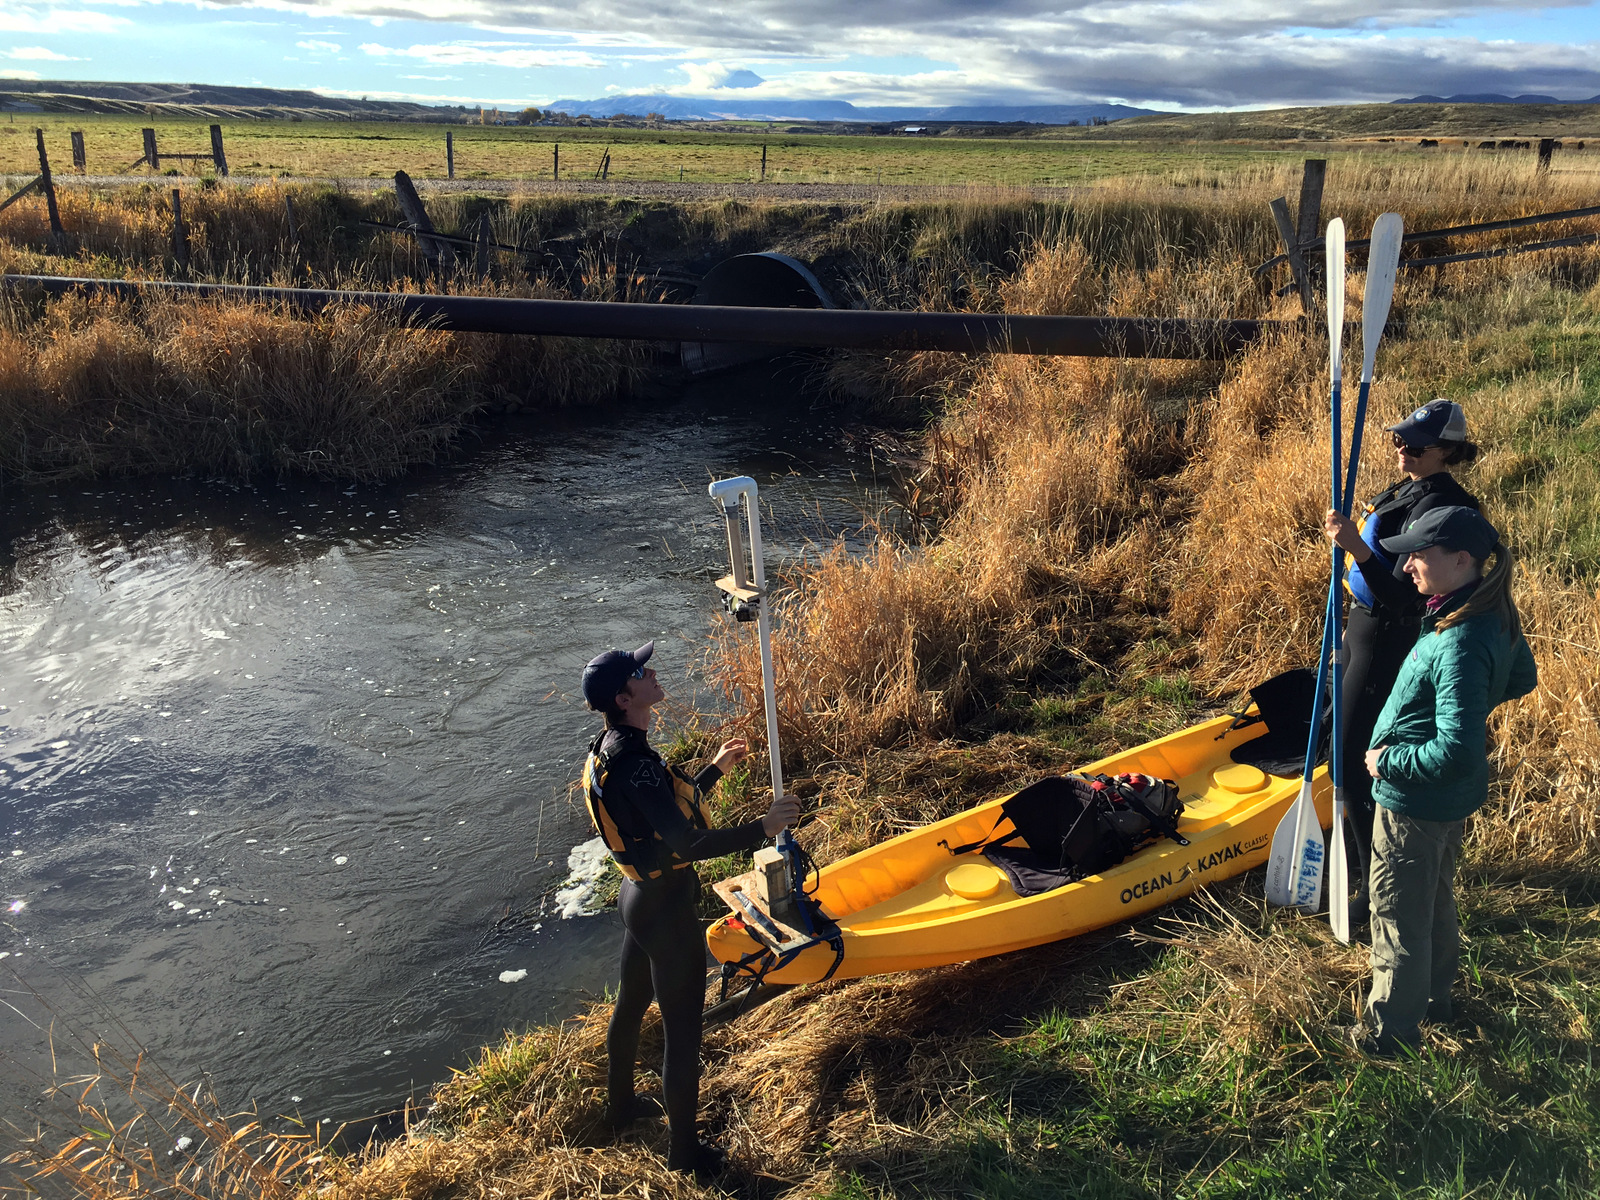 Idaho State University geoscience graduate students prepare sensors and cameras for a Fall 2016 survey of stream conditions on Marsh Creek, a tributary to the Portneuf River in southeast Idaho.